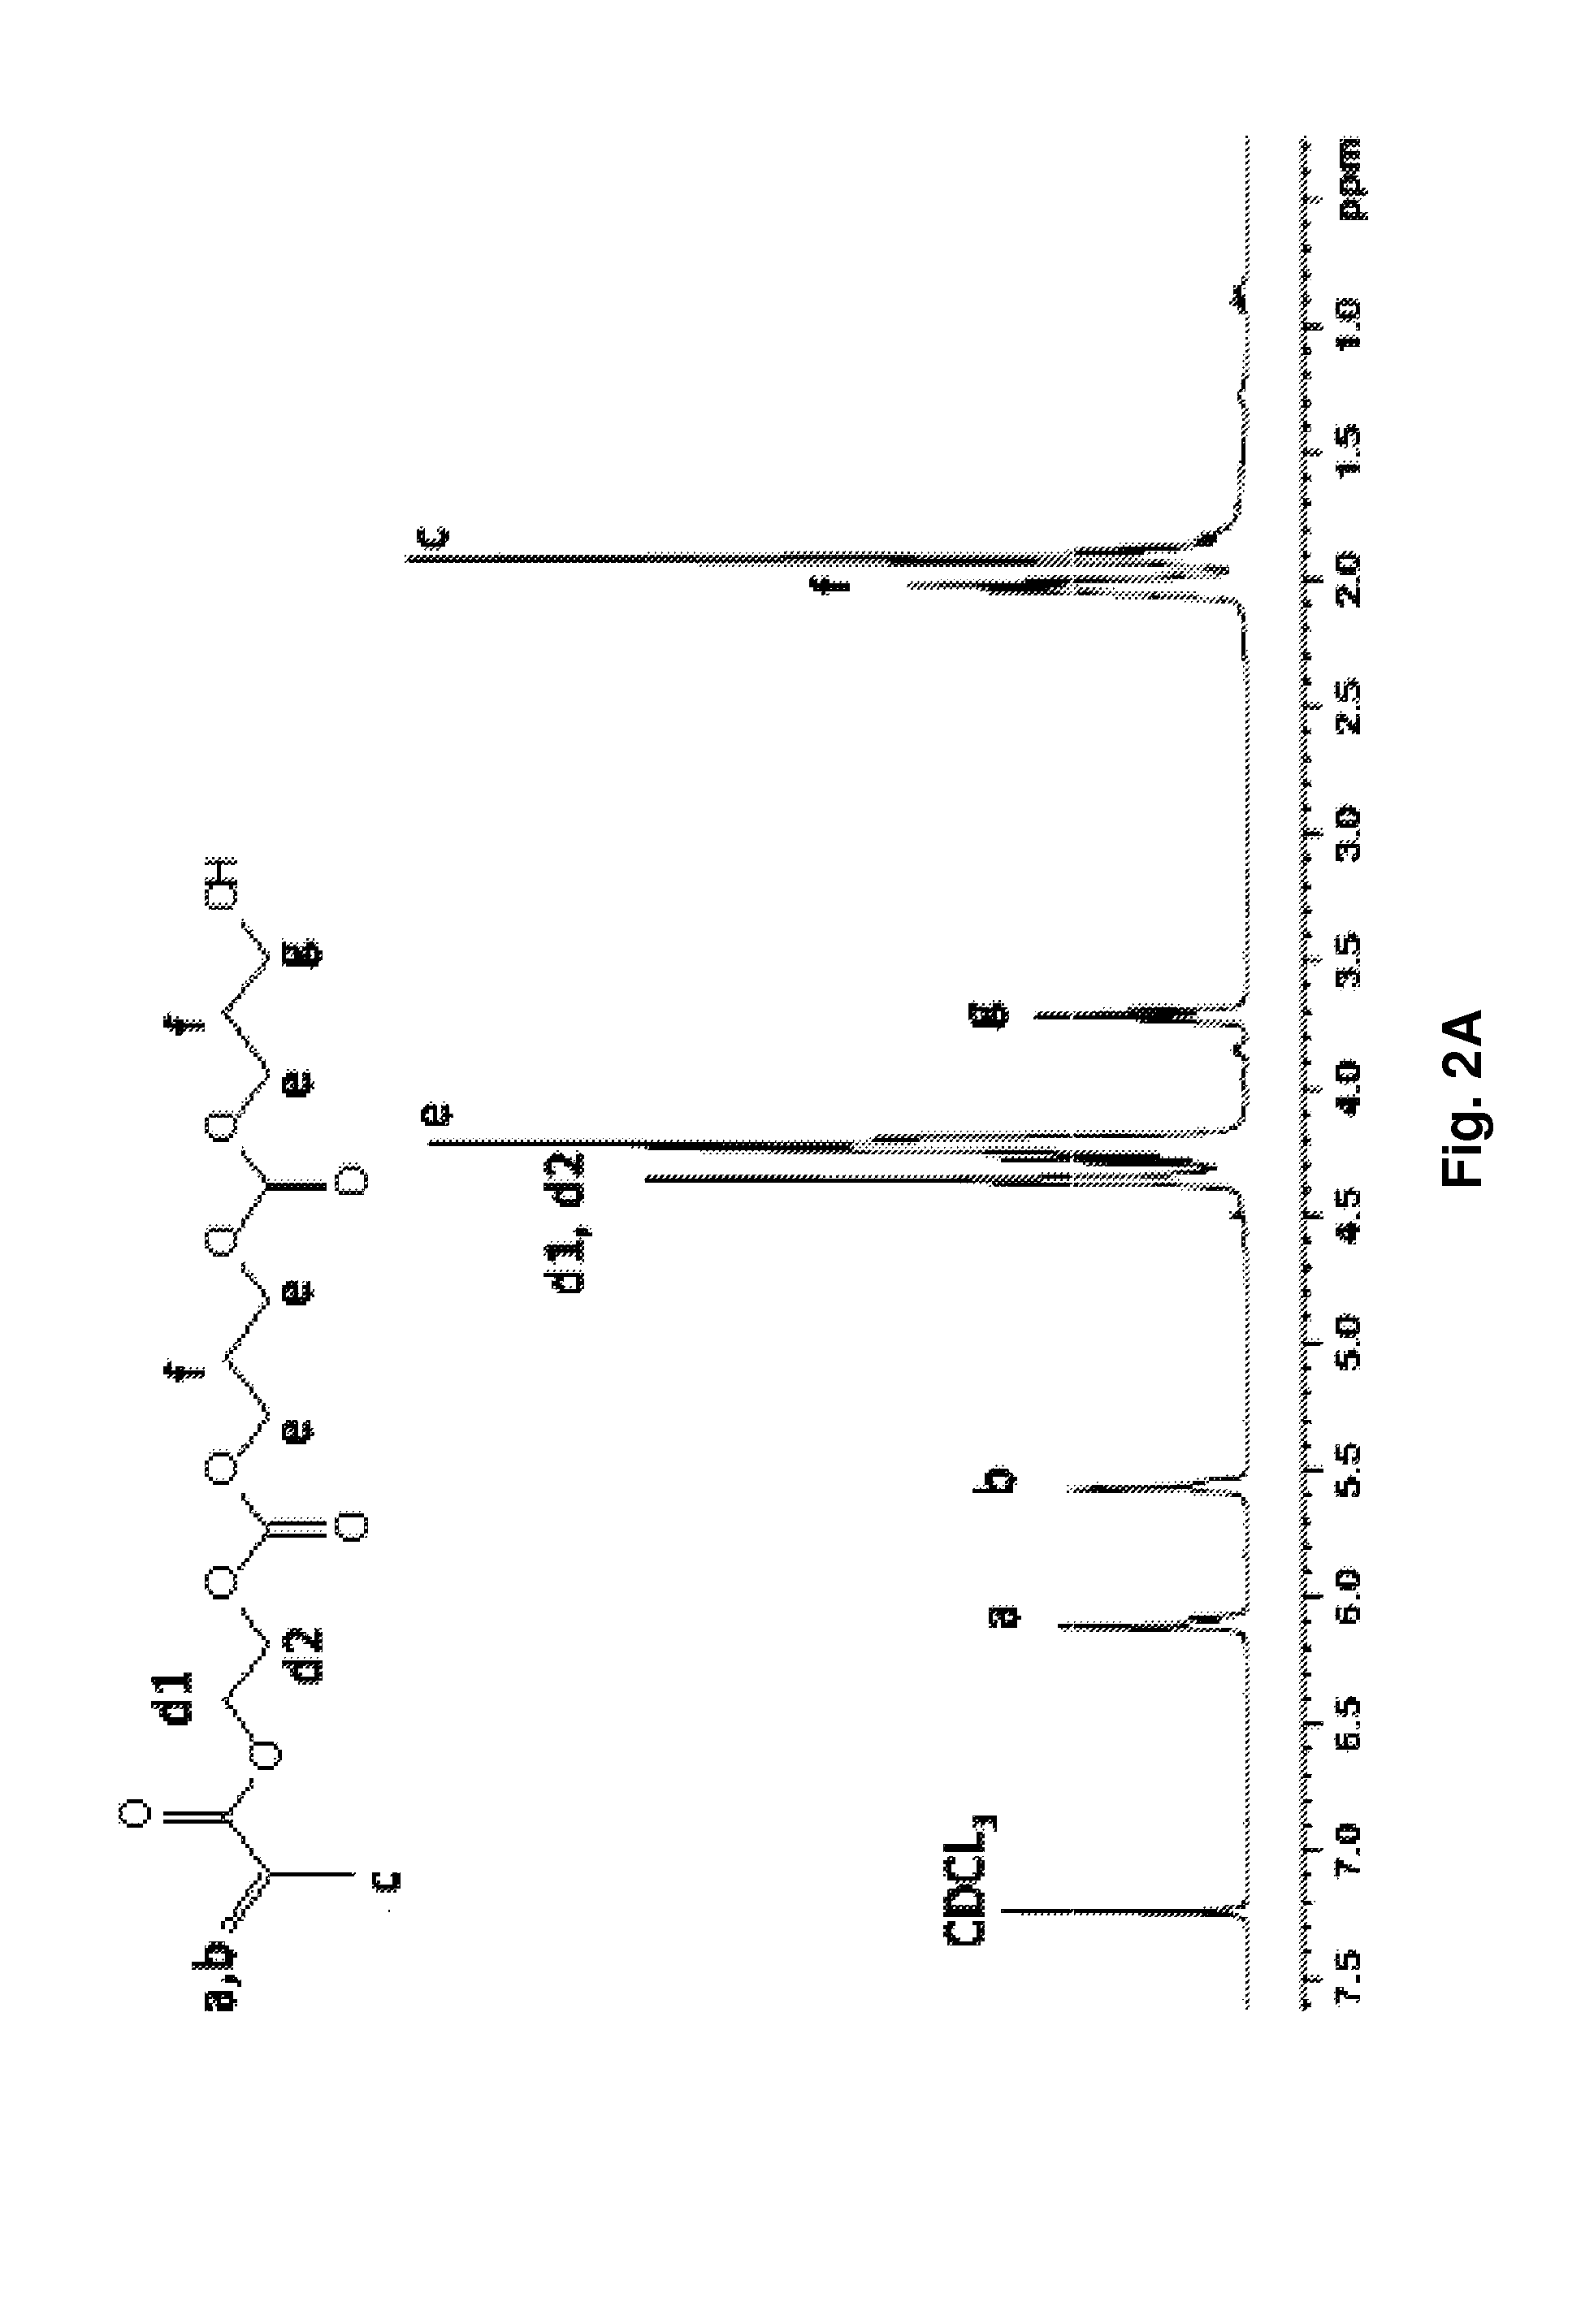 Thermoresponsive, biodegradable, elastomeric material and uses therefor